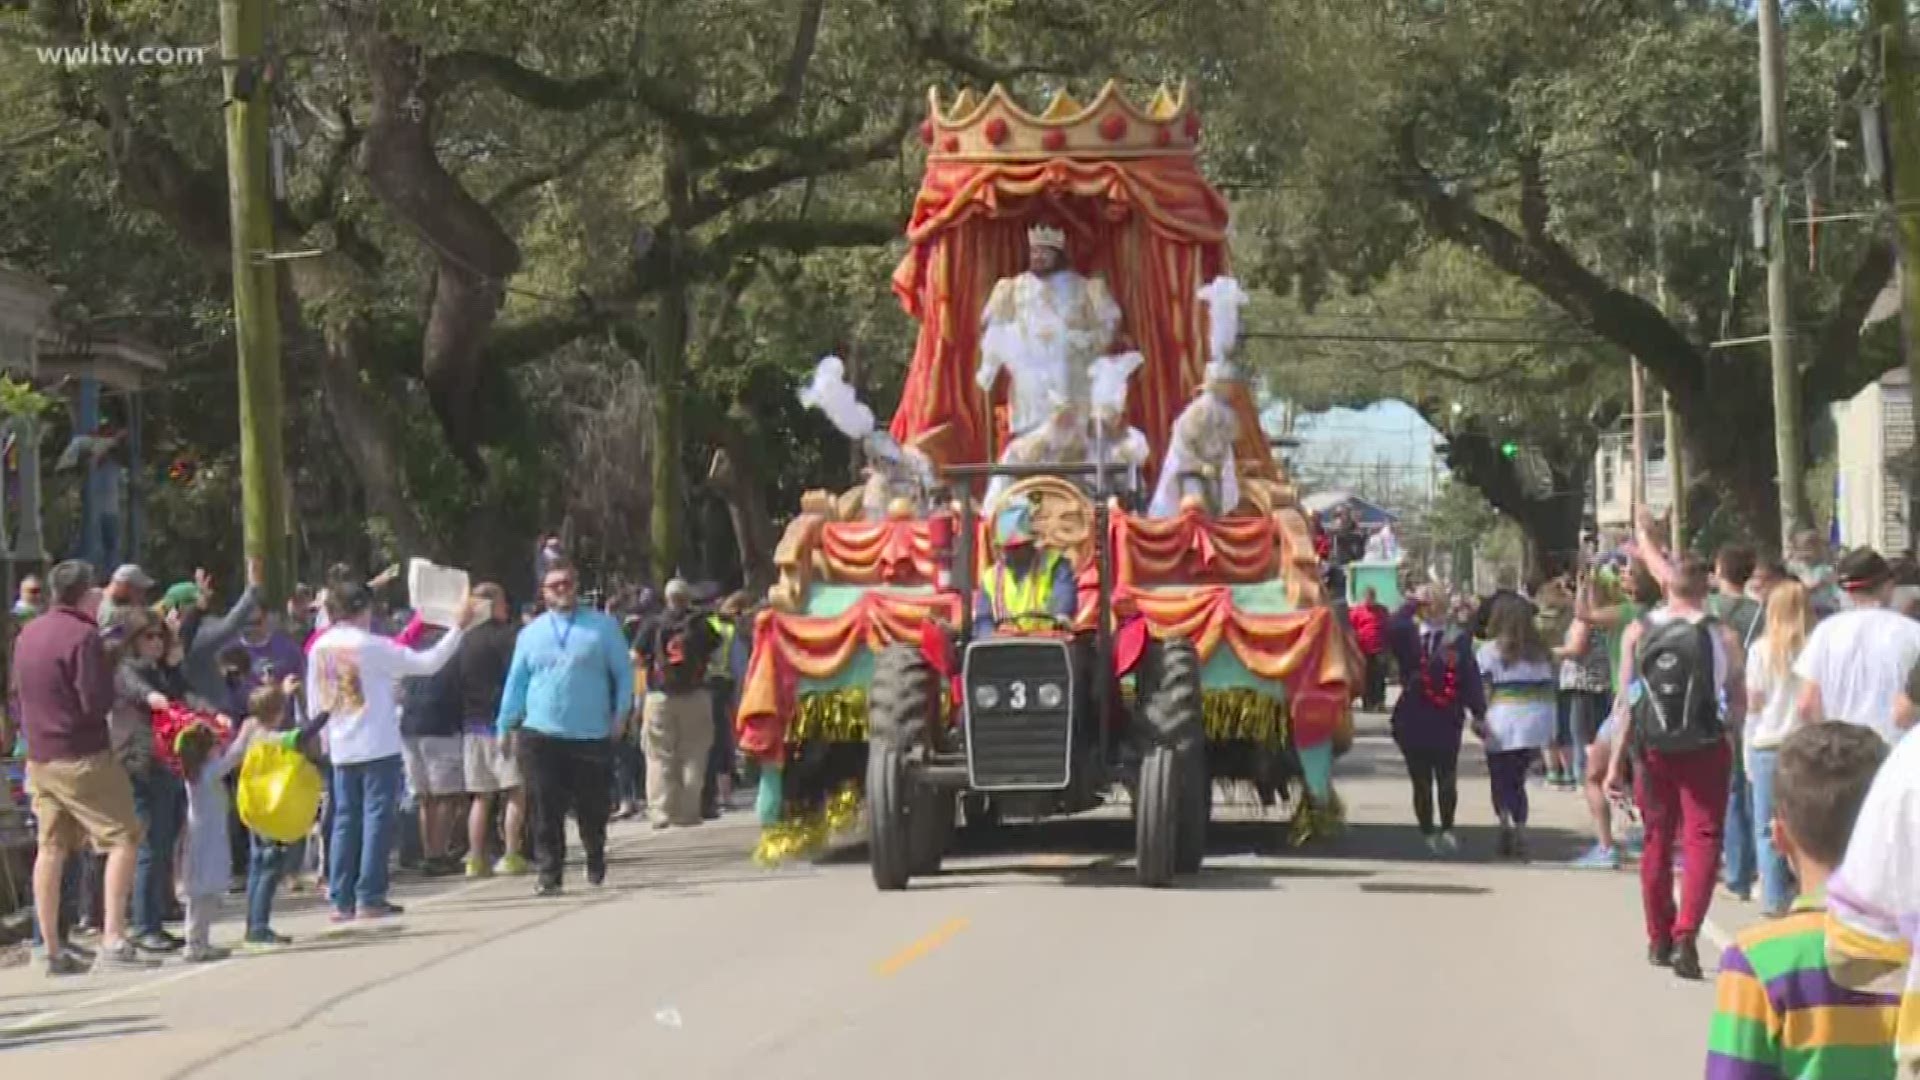 New Orleans Magazine editor and Carnival historian Errol Laborde talks about what makes the Krewe of Carrollton parade on Sunday special.